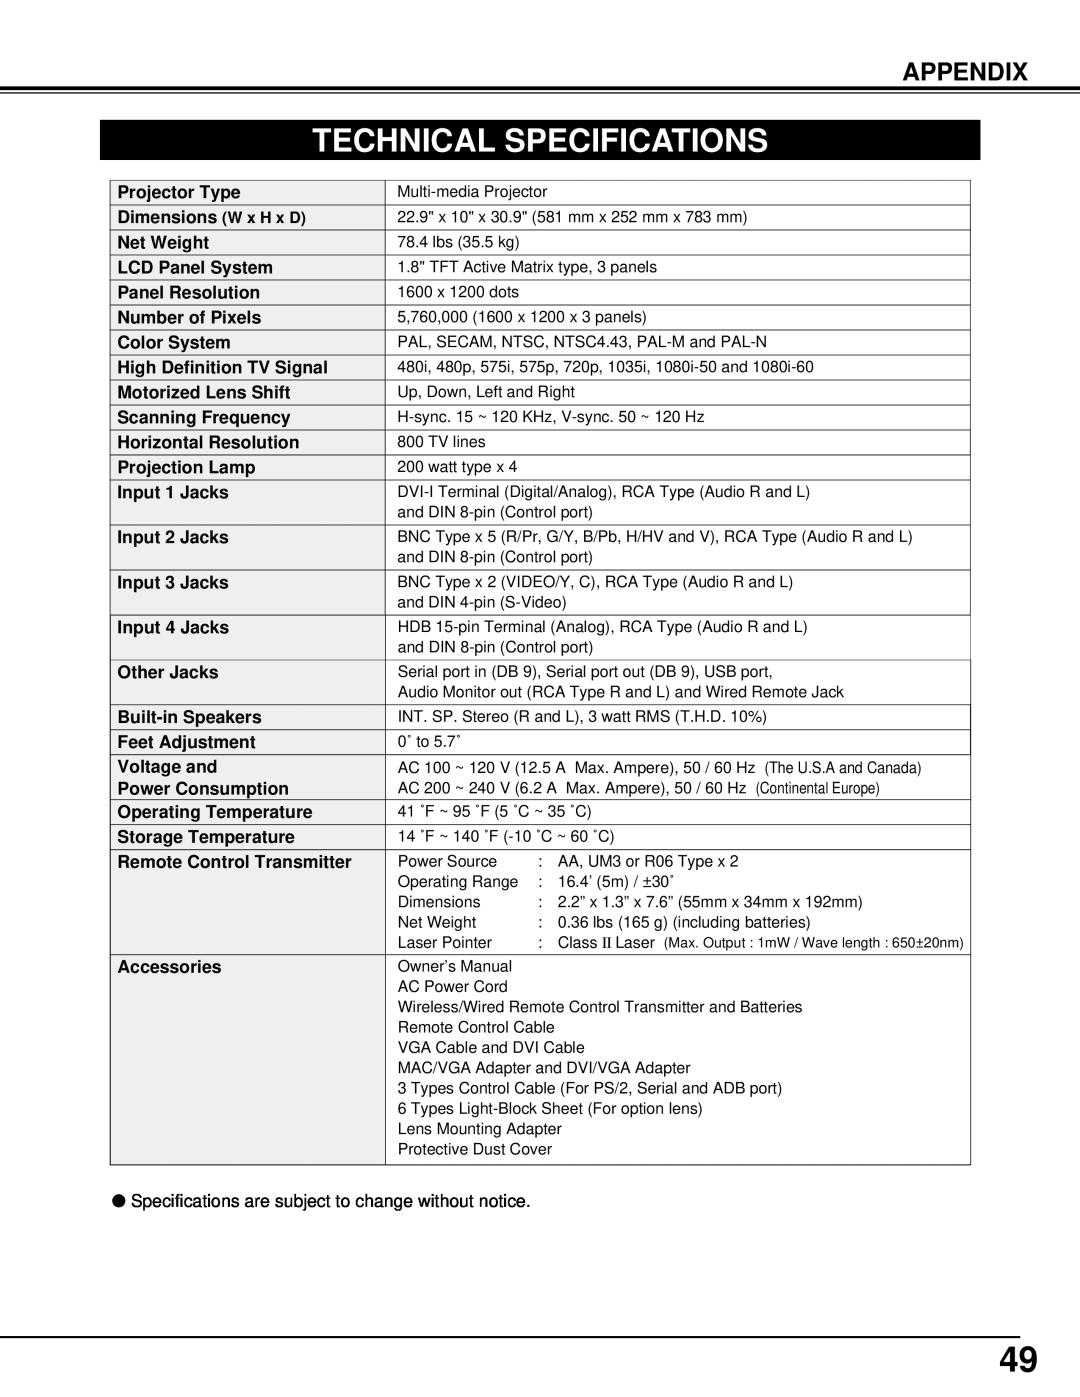 Eiki LC-UXT1 instruction manual Technical Specifications, Appendix 